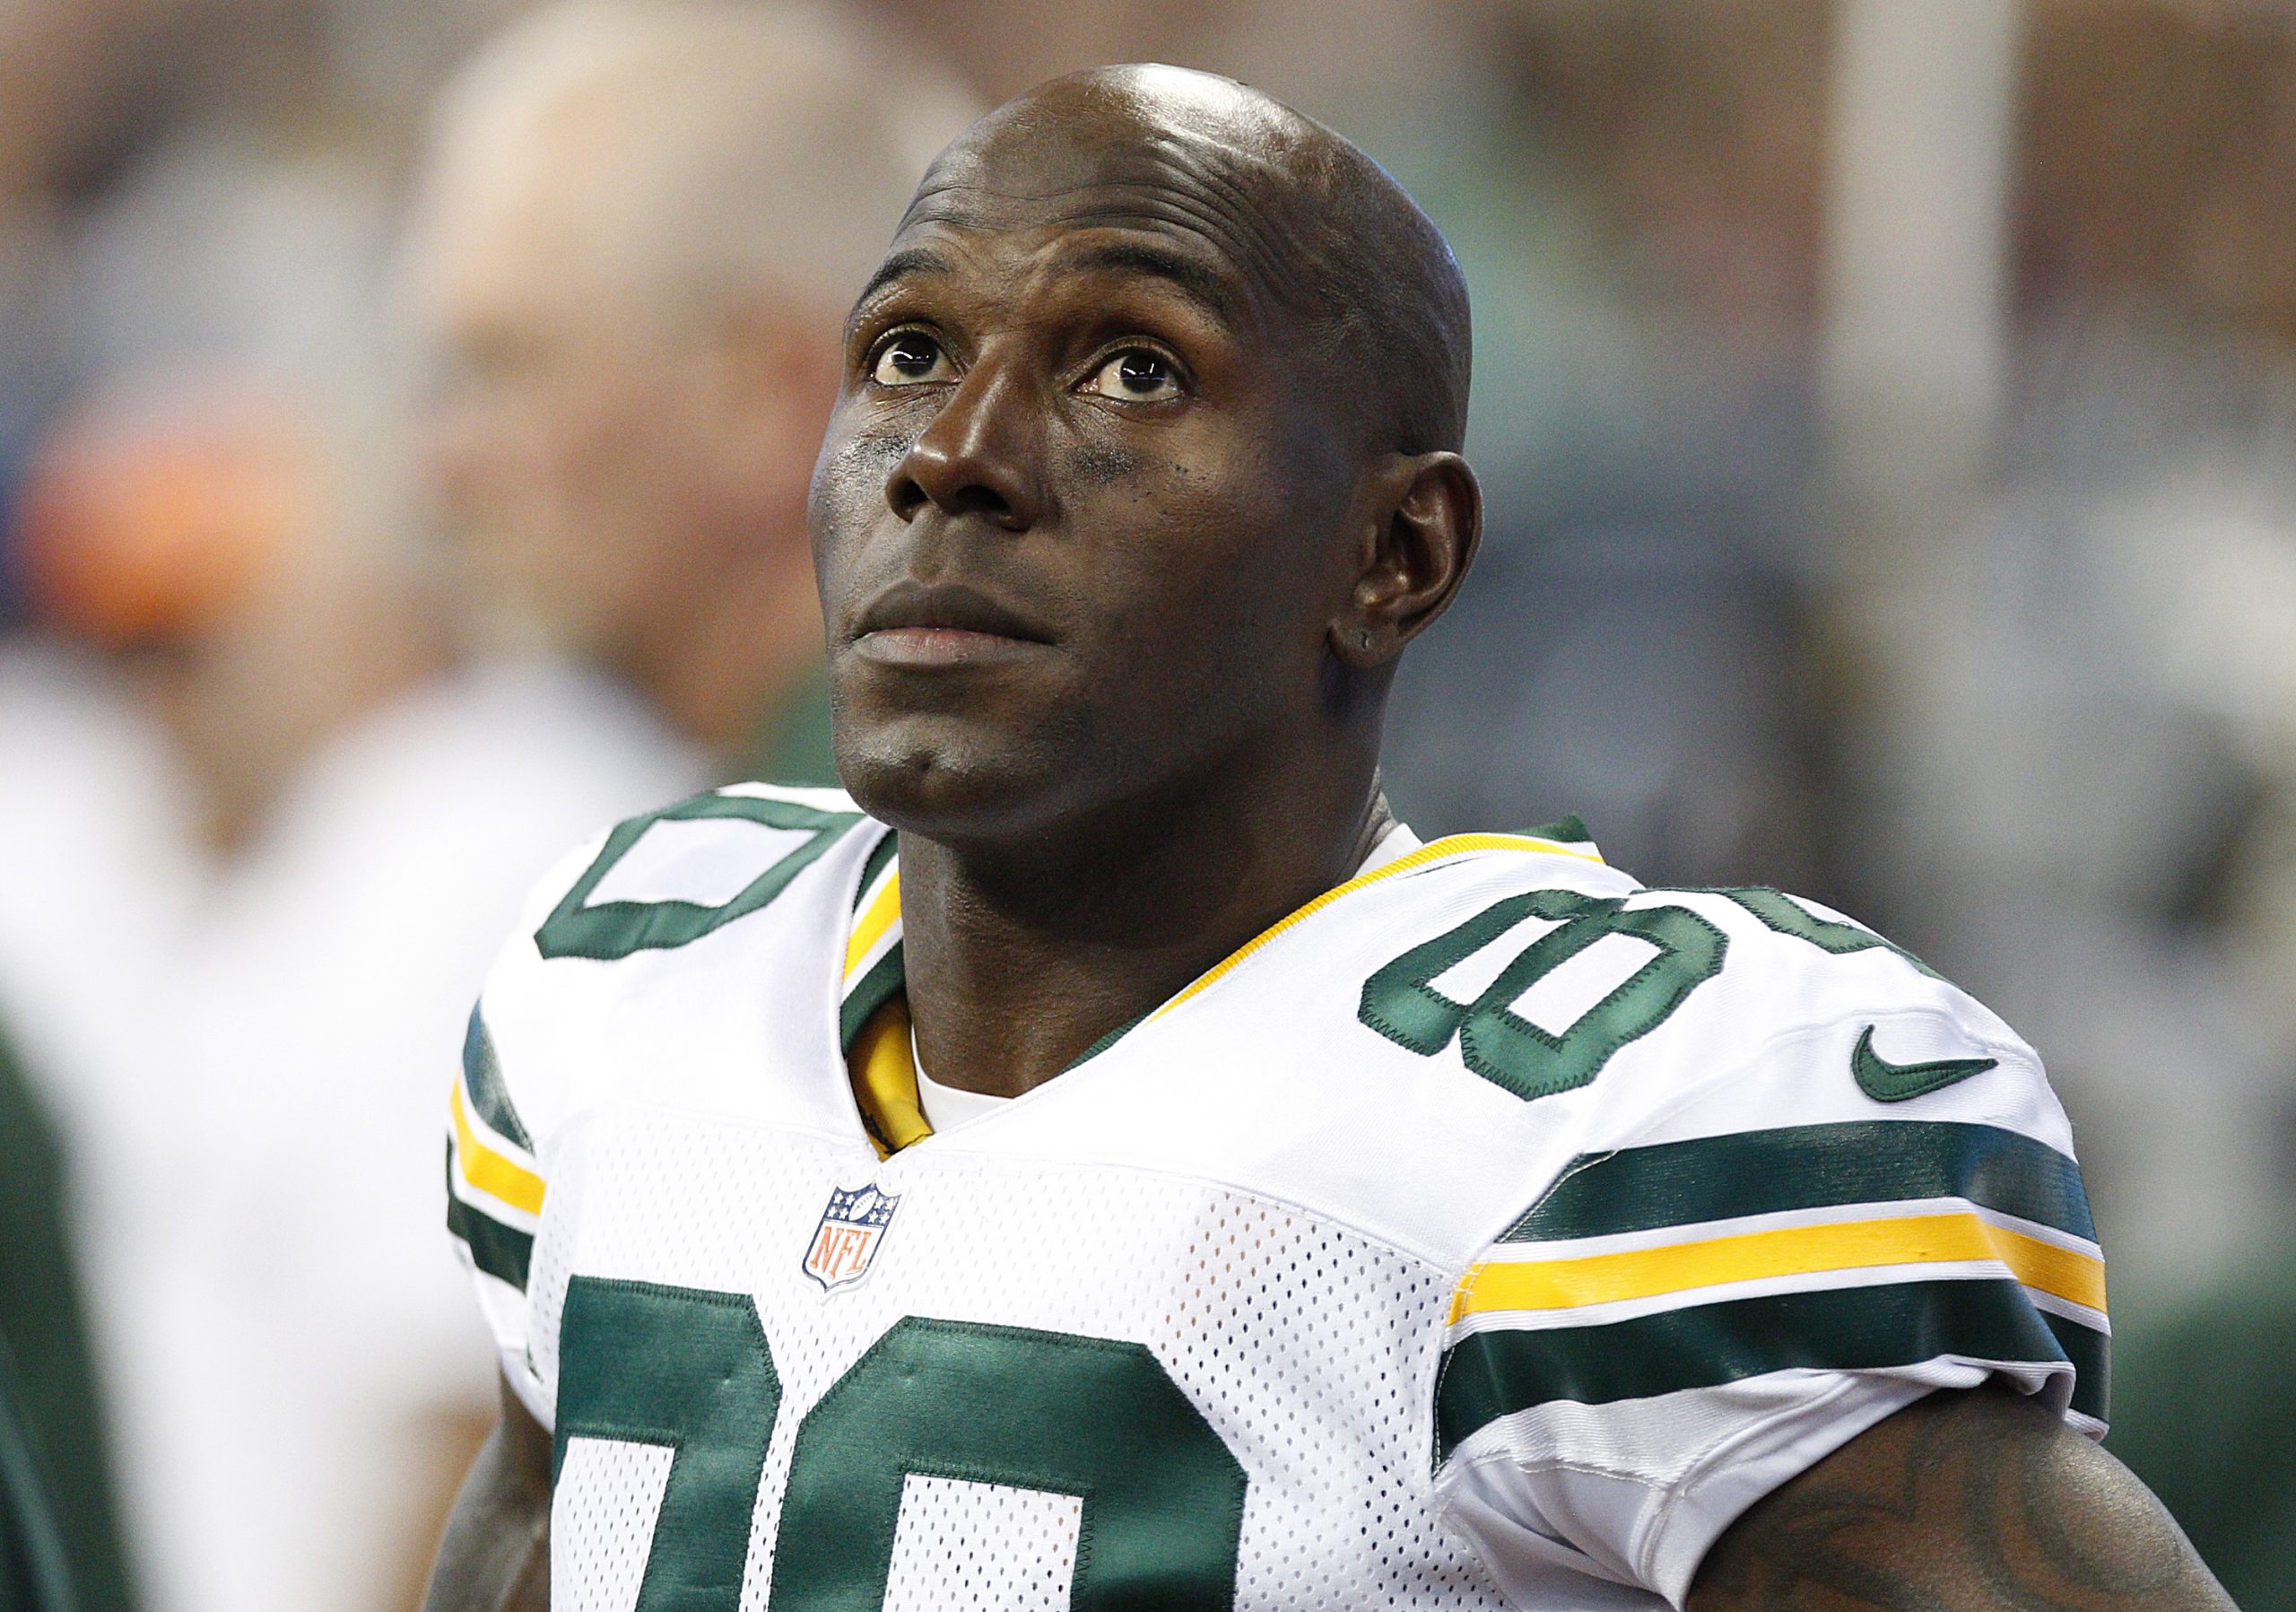 Donald Driver of the Green Bay Packers on the sidelines against the Houston Texans on October 14, 2012.